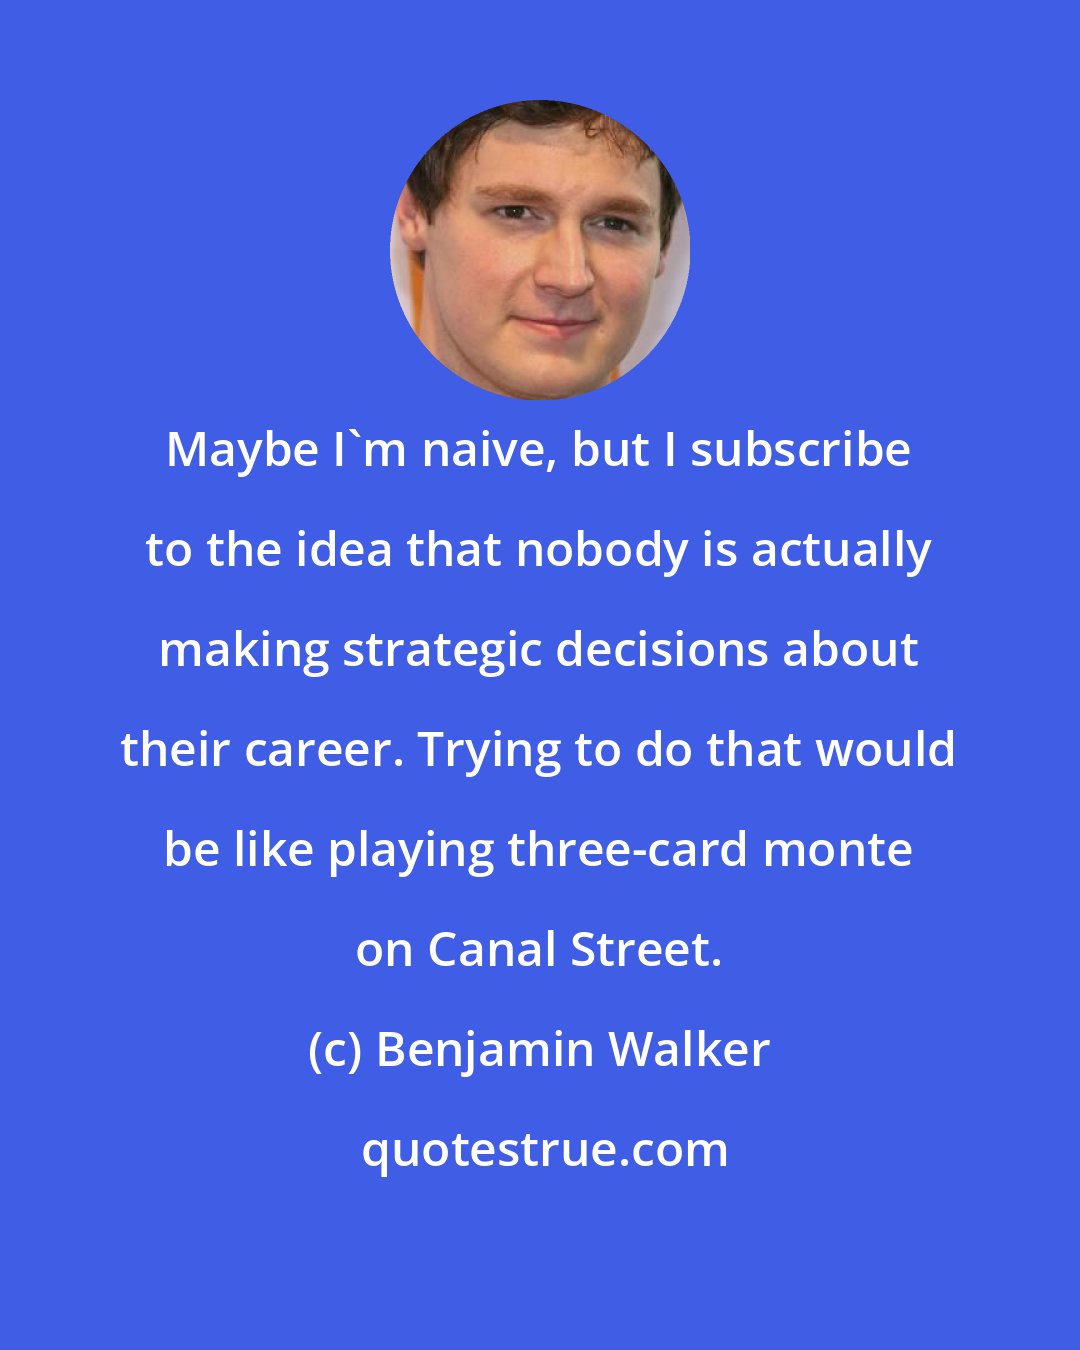 Benjamin Walker: Maybe I'm naive, but I subscribe to the idea that nobody is actually making strategic decisions about their career. Trying to do that would be like playing three-card monte on Canal Street.